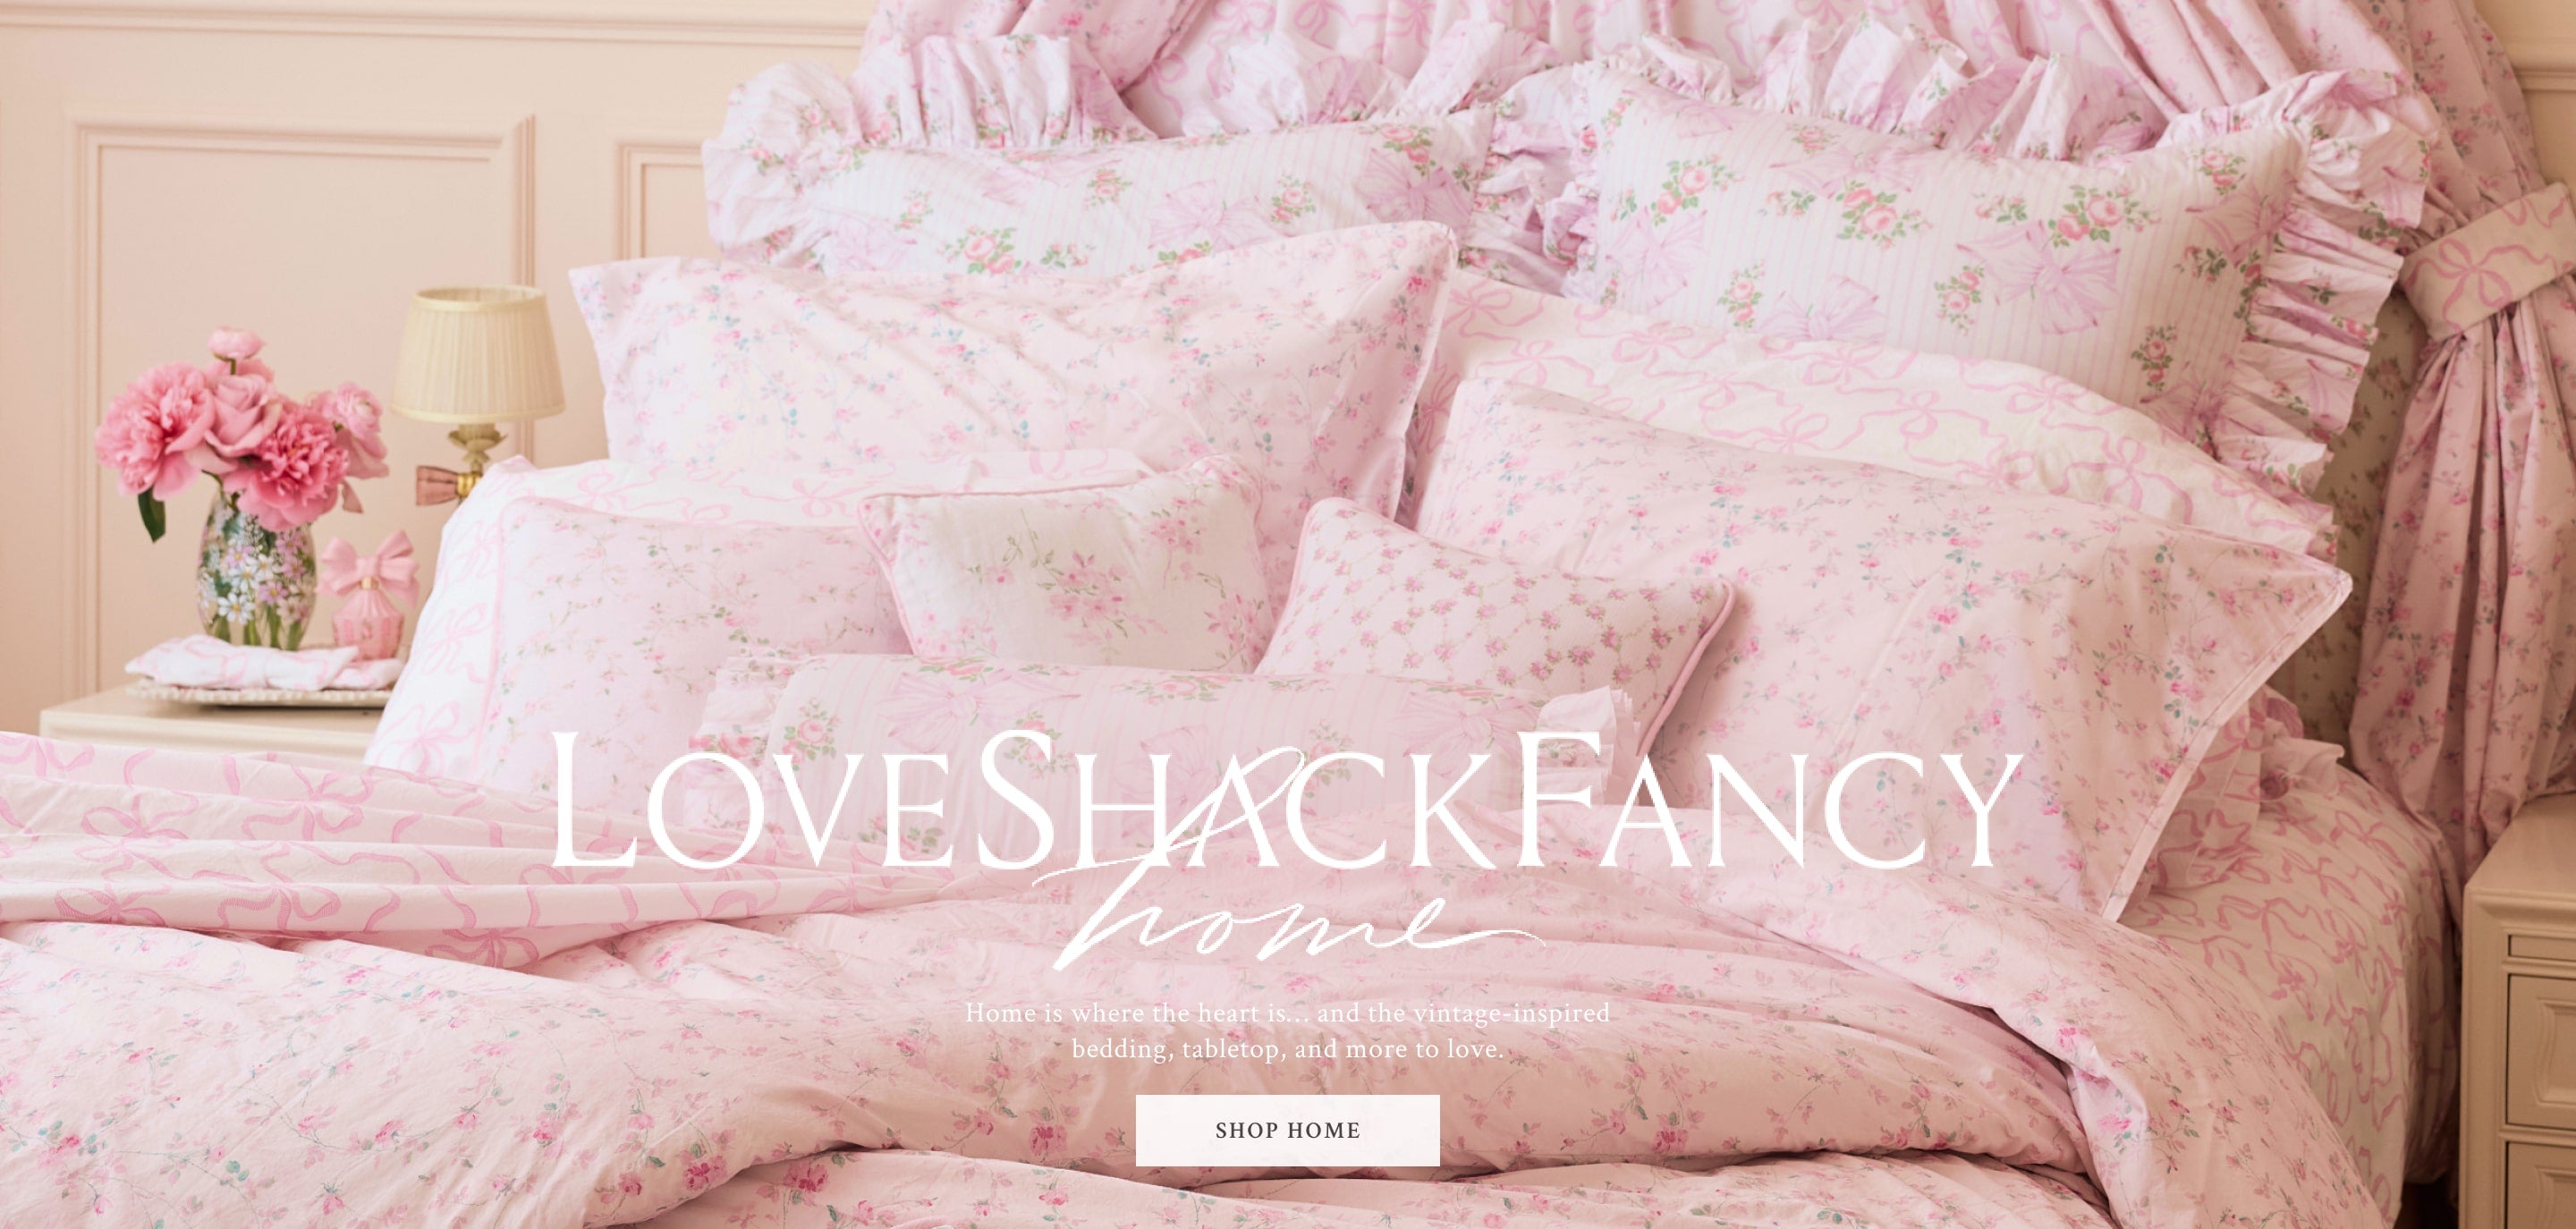 Home is where the heart is... Shop new LoveShackFancy Home